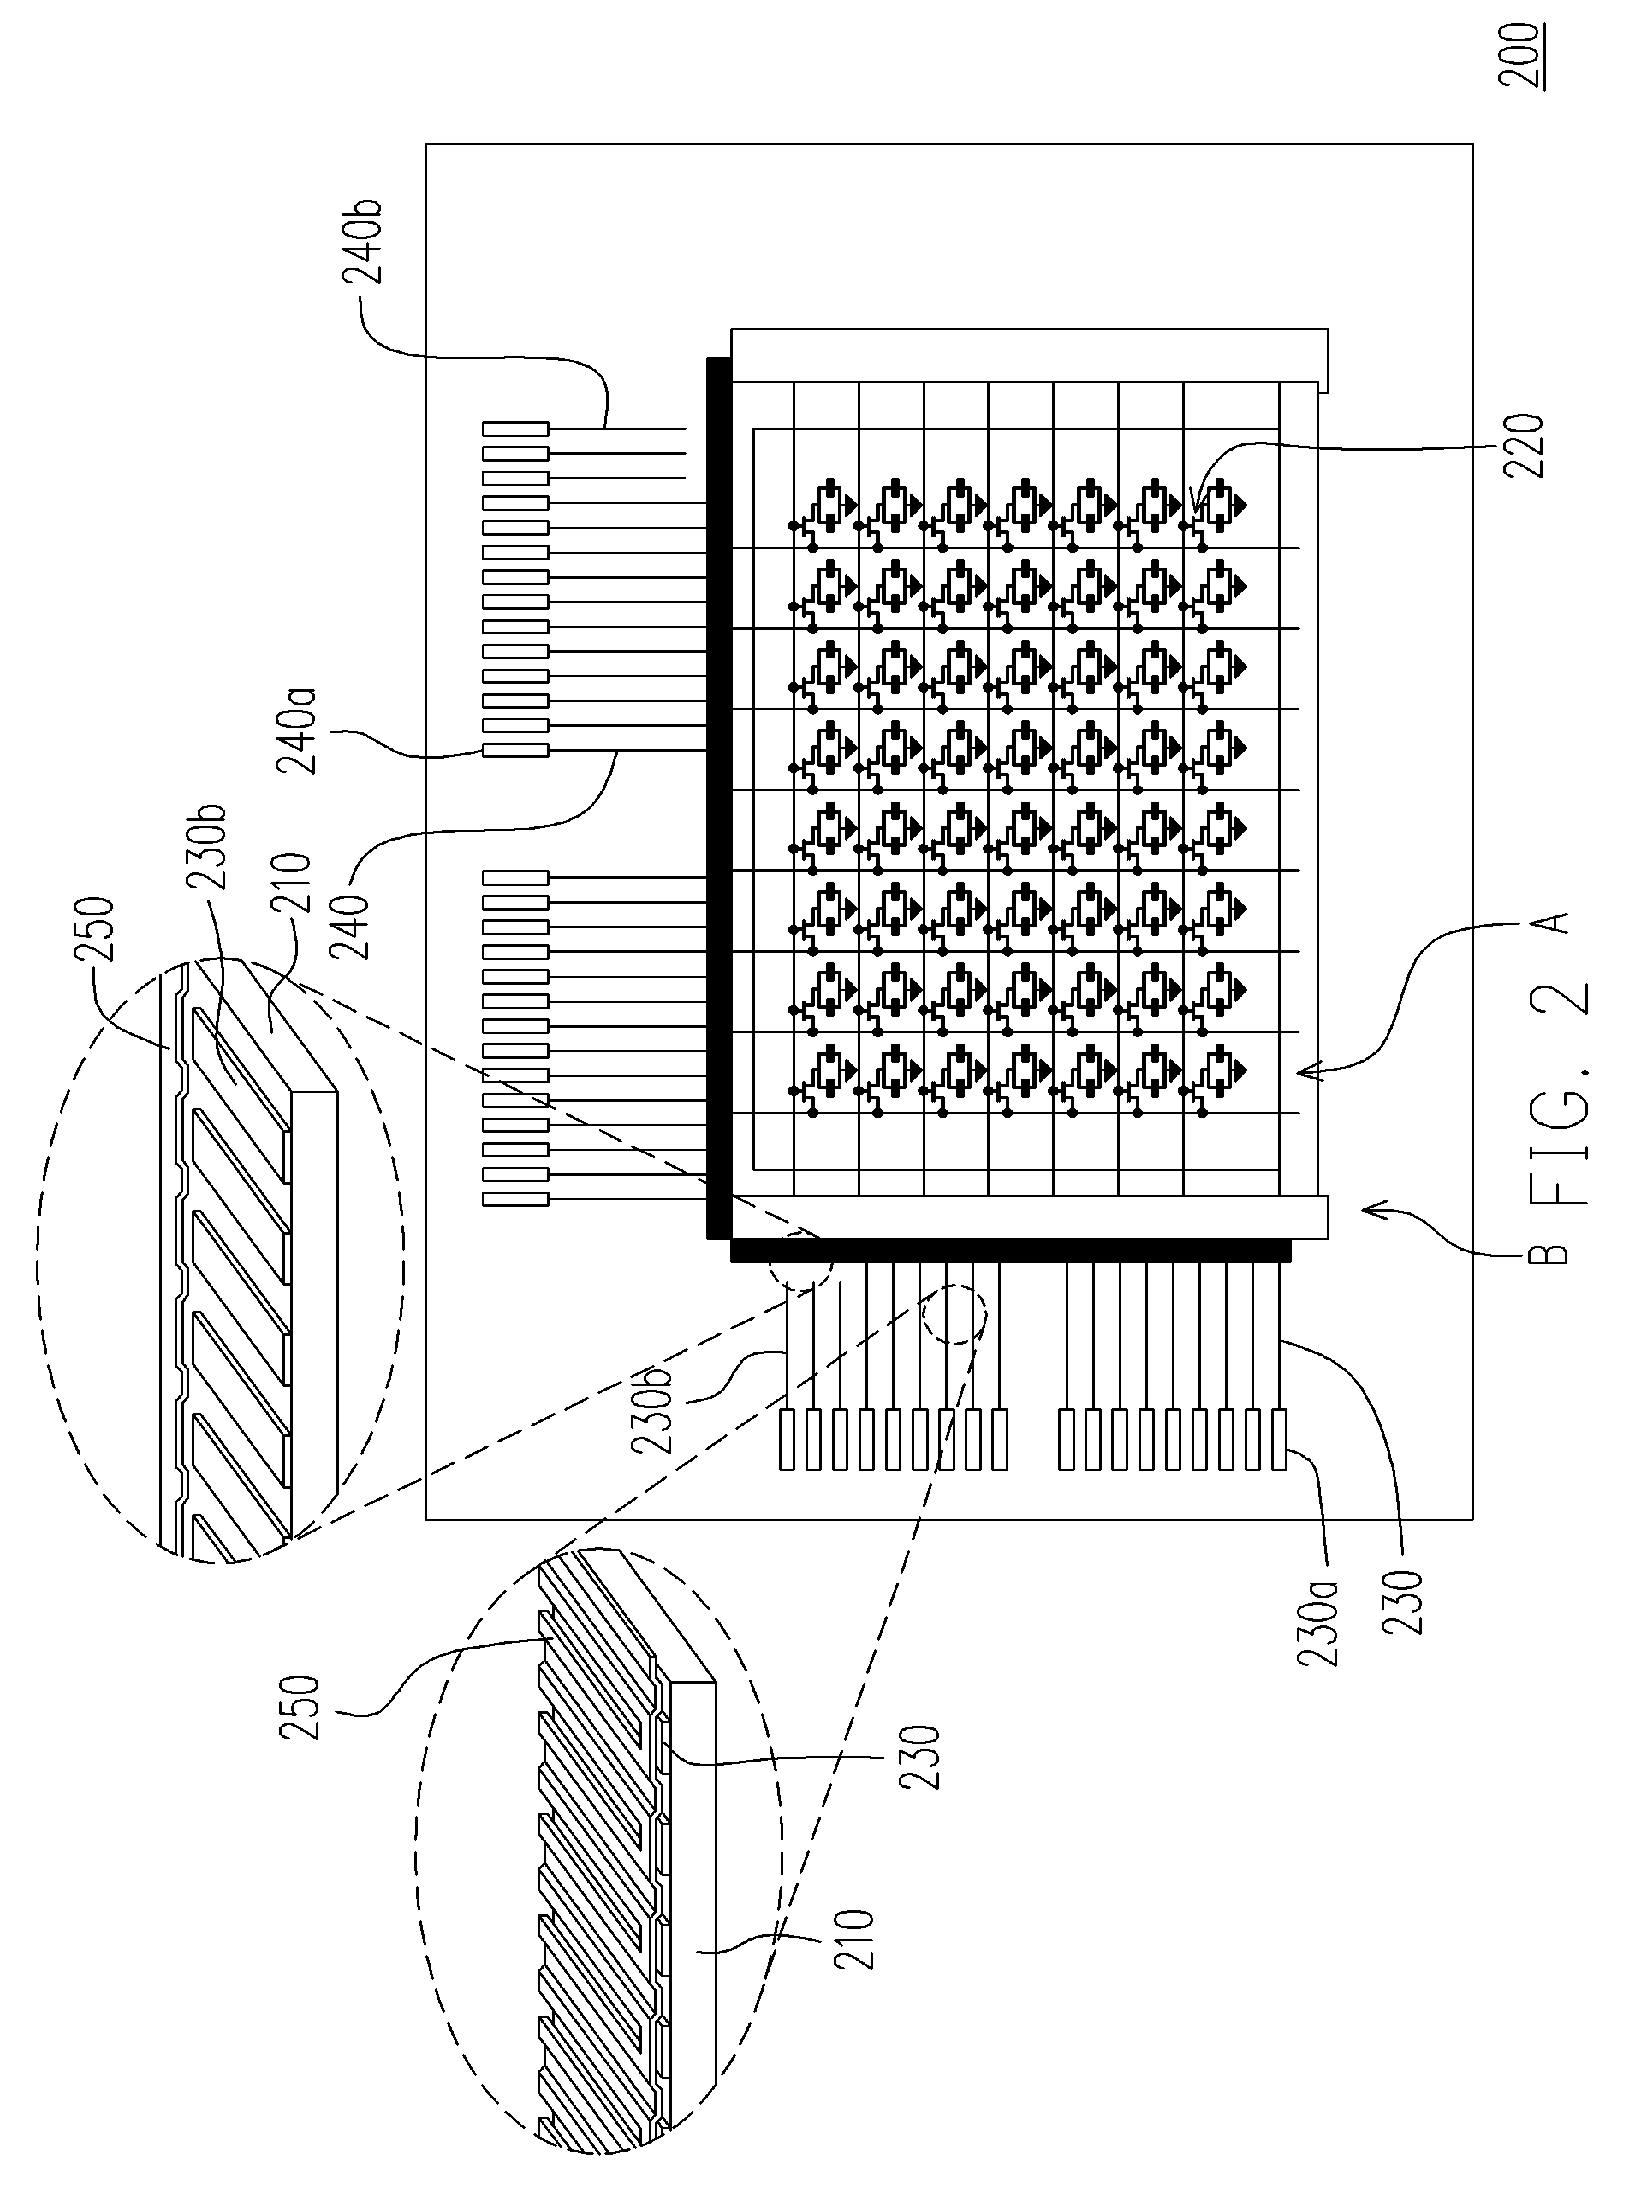 Active devices array substrate and repairing method thereof